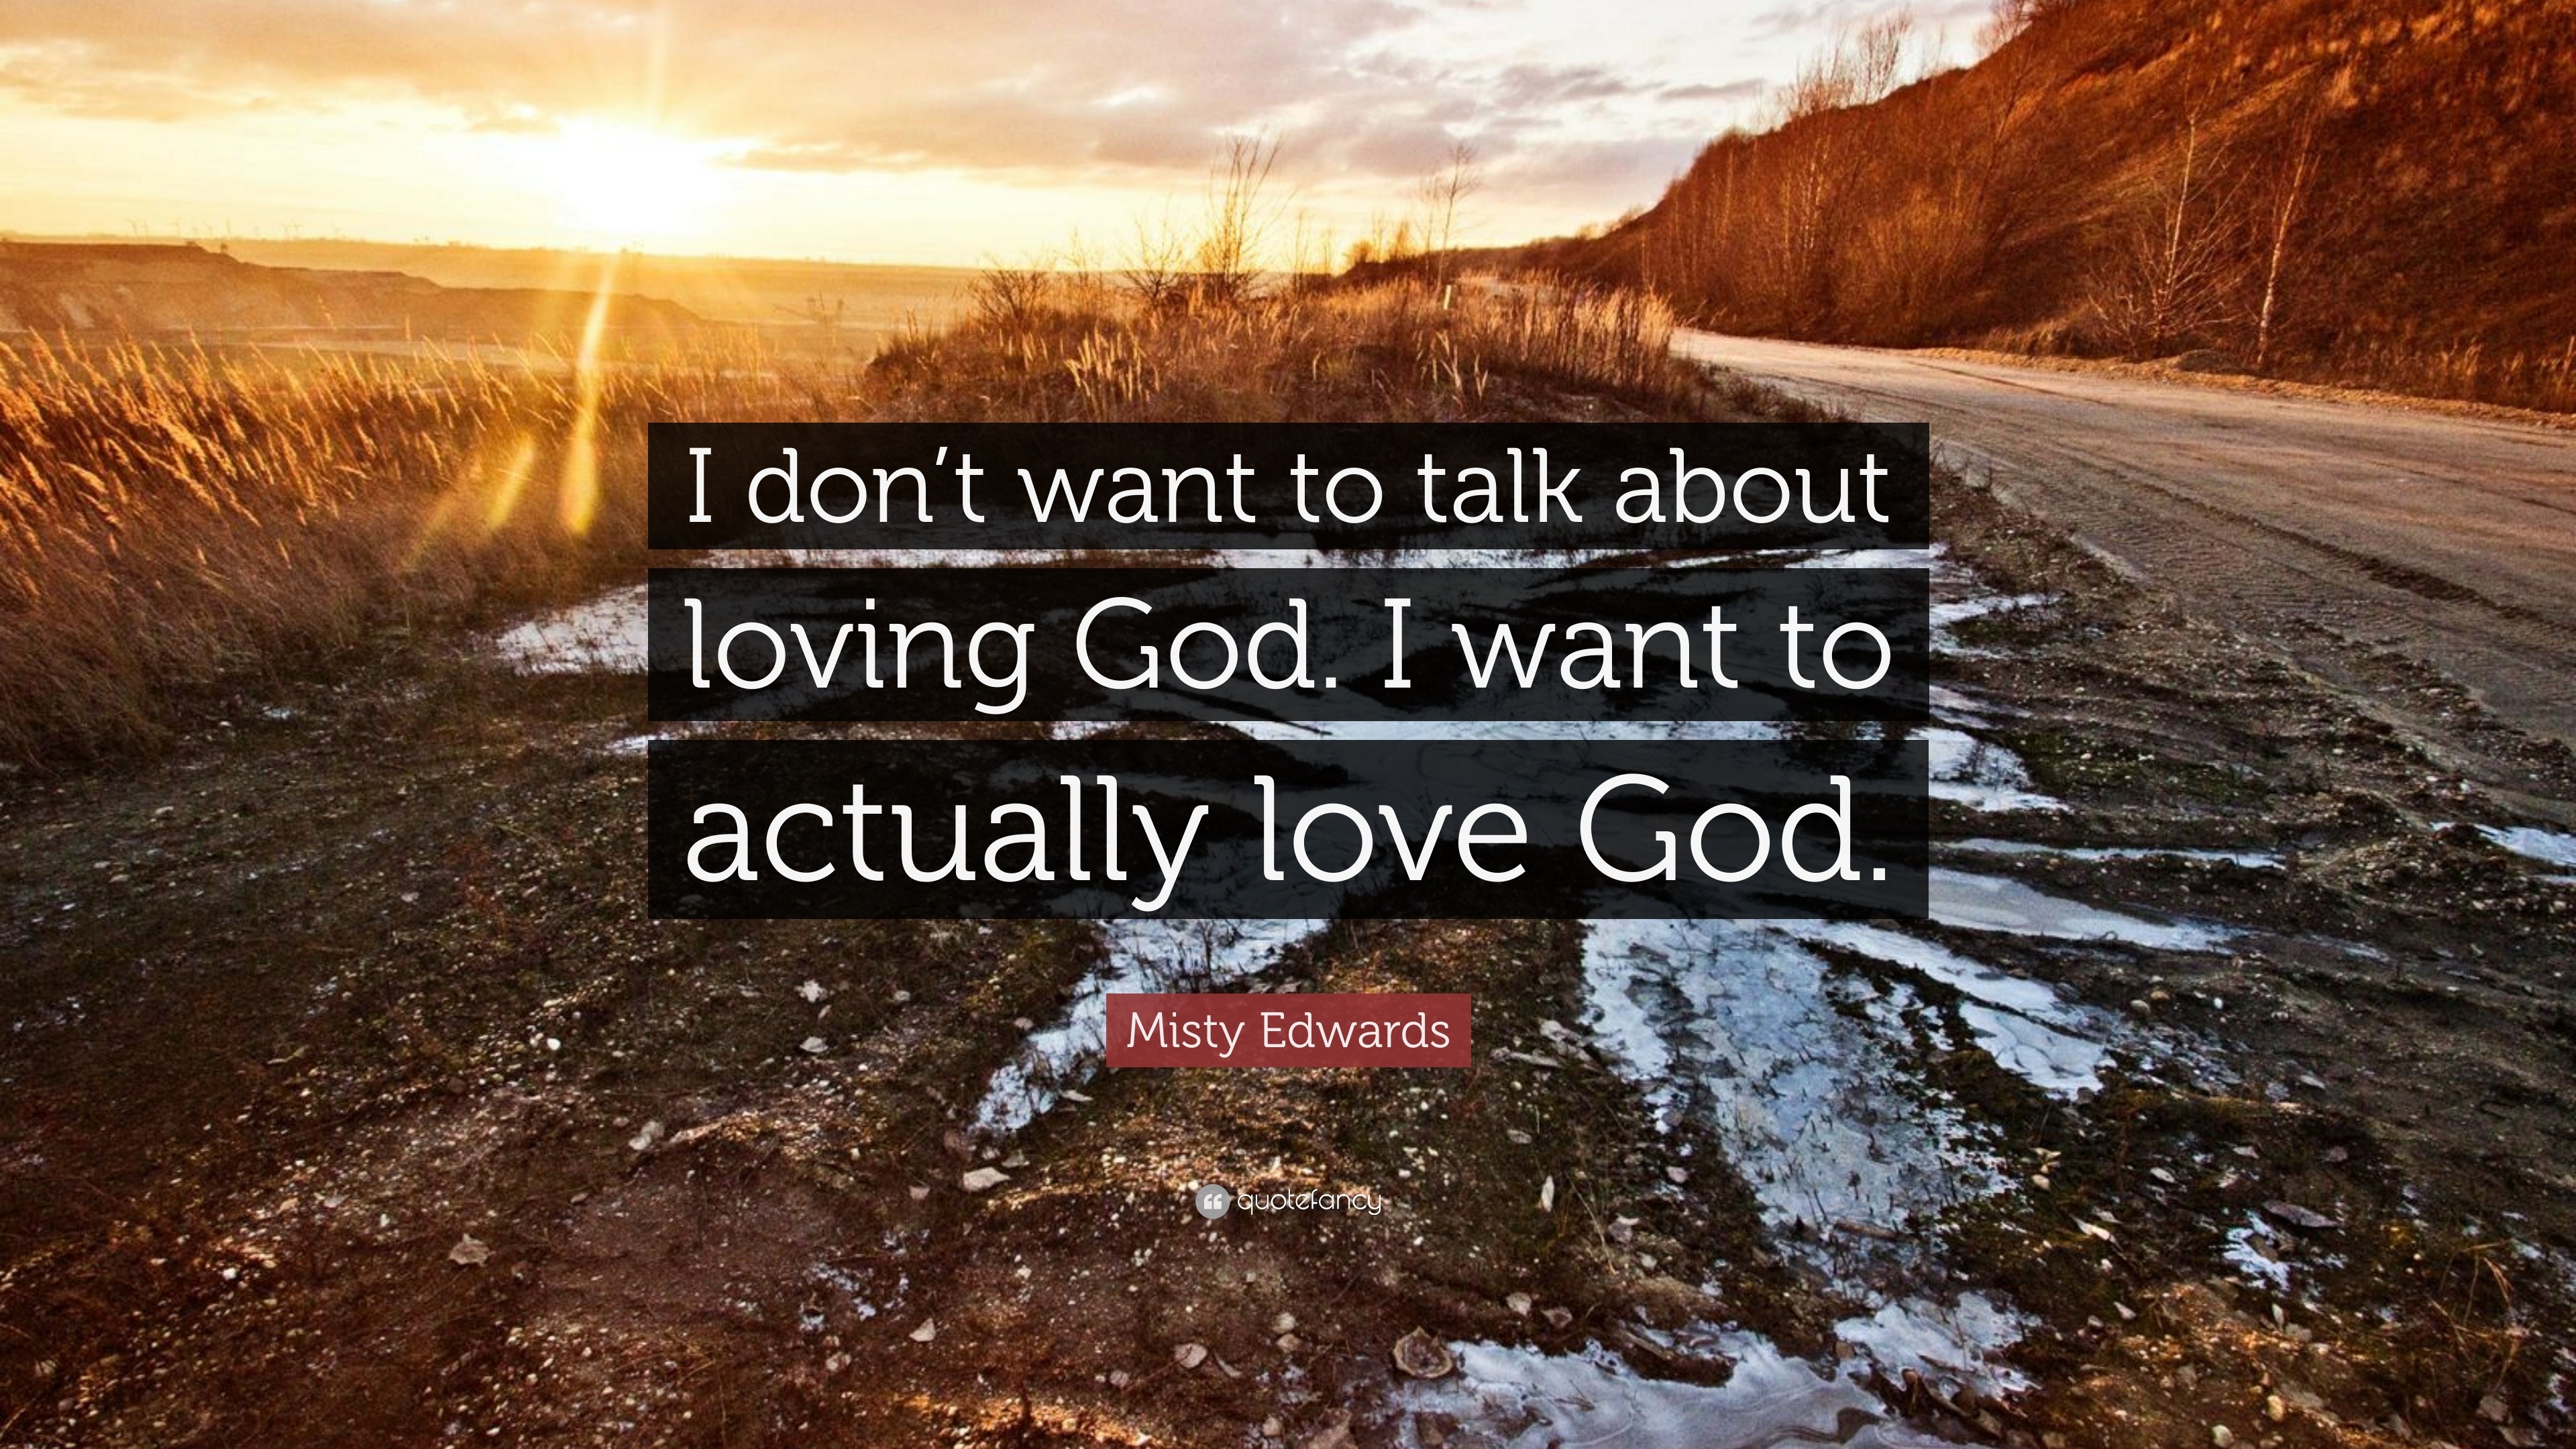 Download Misty Edwards Quote: "I don't want to talk about loving ...